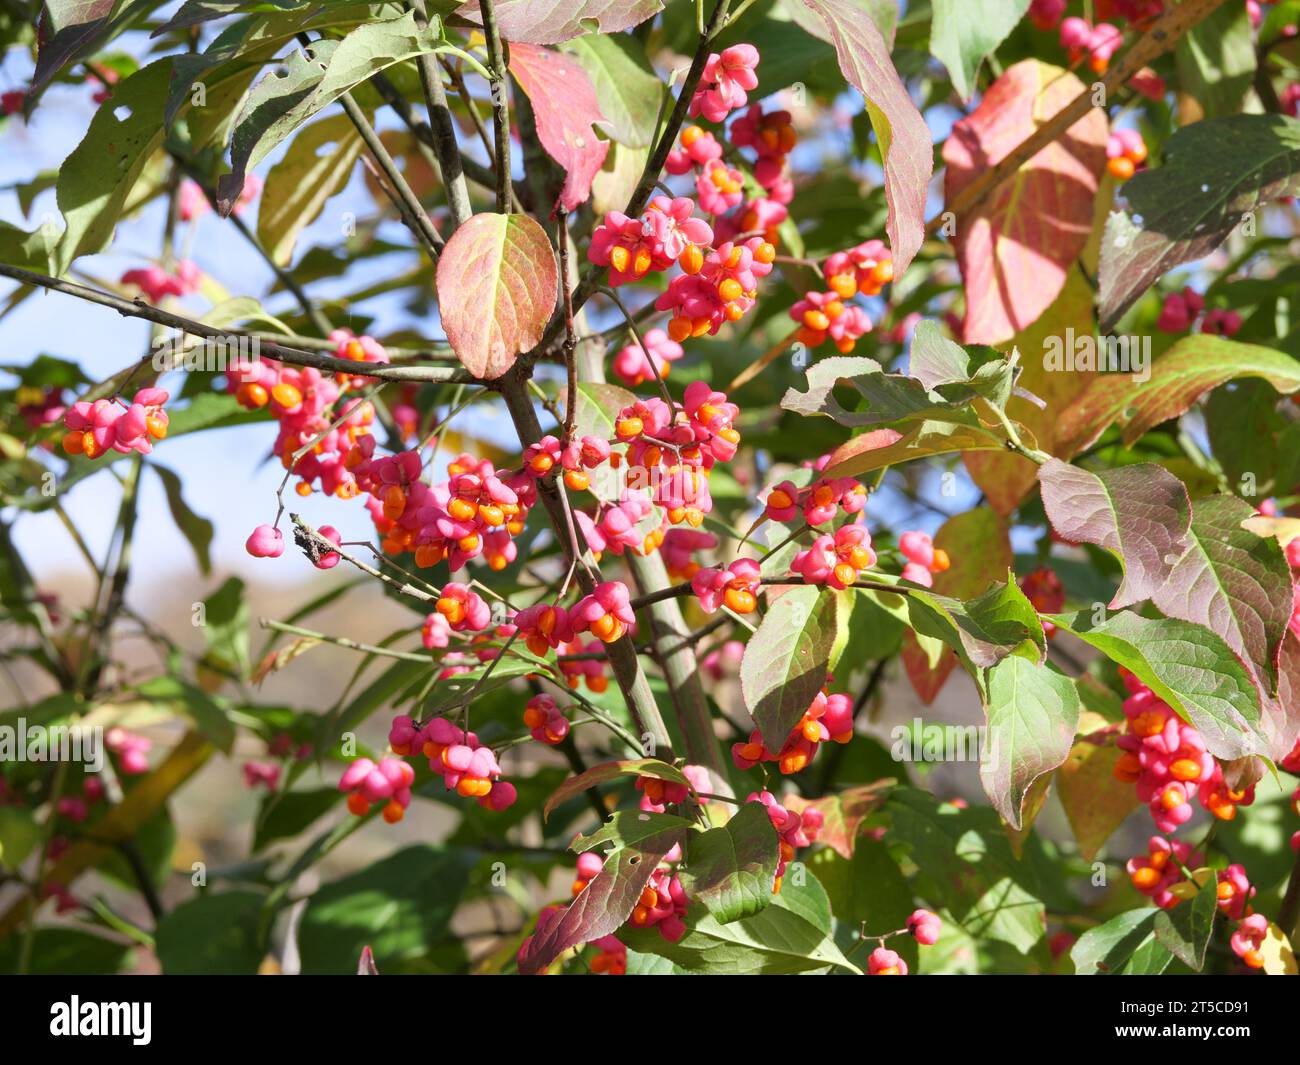 The red fruits of the euonymus, Euonymus europaea, and the green leaves in November Stock Photo